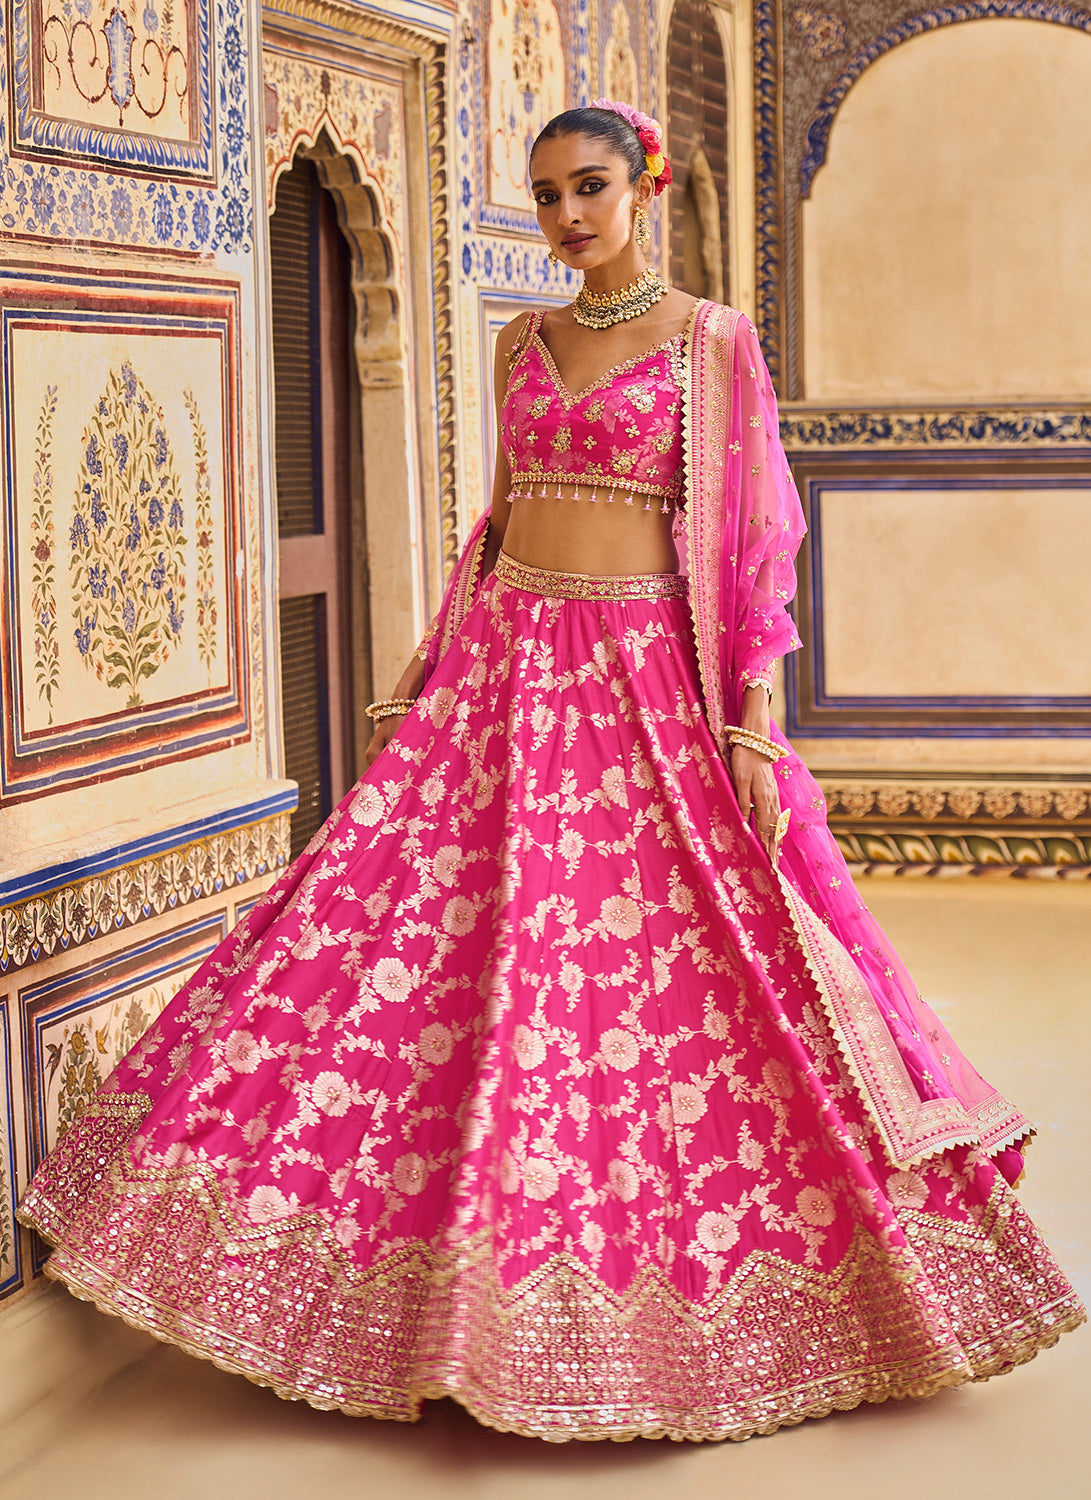 Brocade Lehenga Choli With Net Dupatta Manufacturer Supplier from Lucknow  India